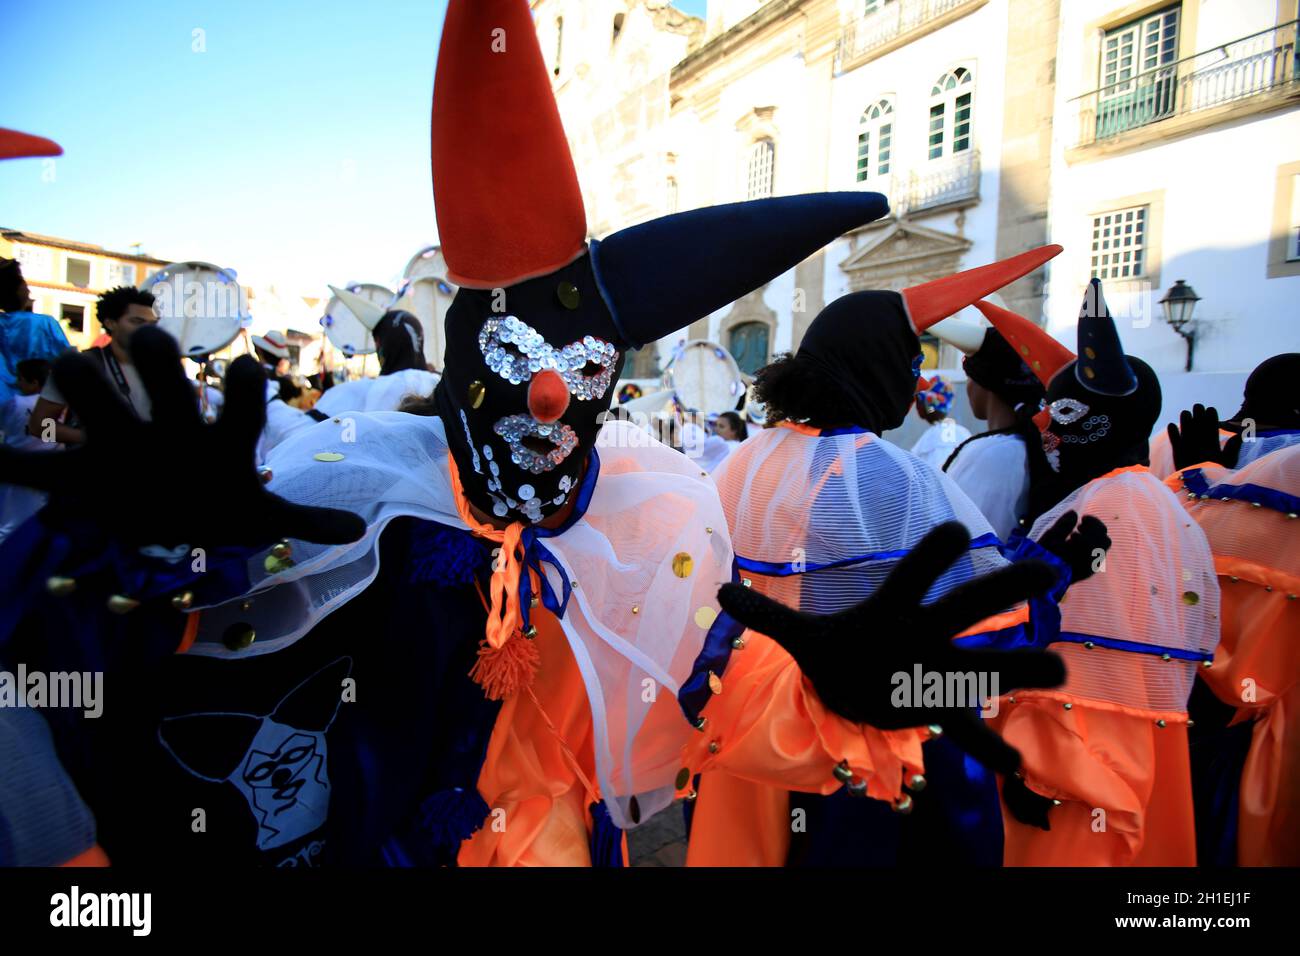 salvador, bahia / brazil - february 5, 2016: masked men are seen in Pelourinho during the carnival in the city of Salvador. *** Local Caption *** Stock Photo